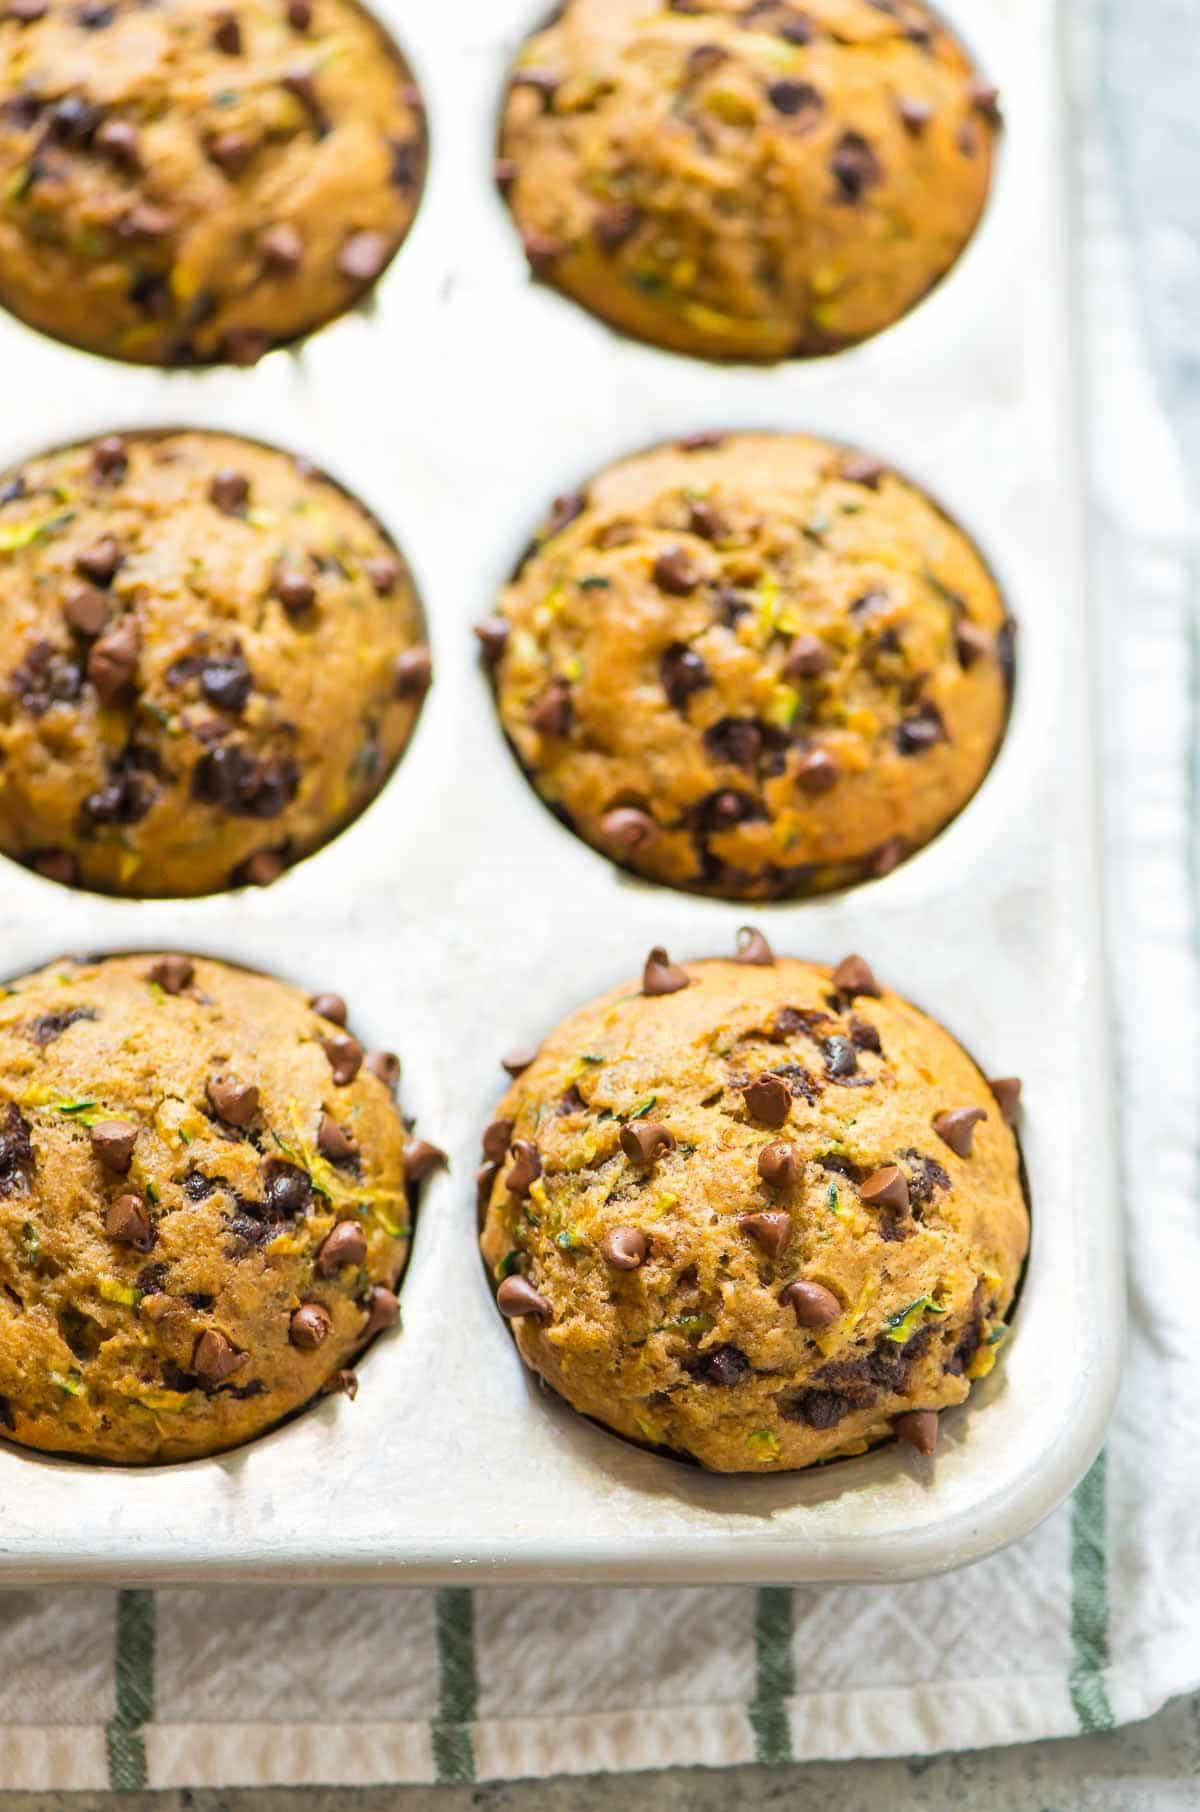 Healthy Zucchini Bread Muffins
 Healthy Zucchini Muffins with Chocolate Chips